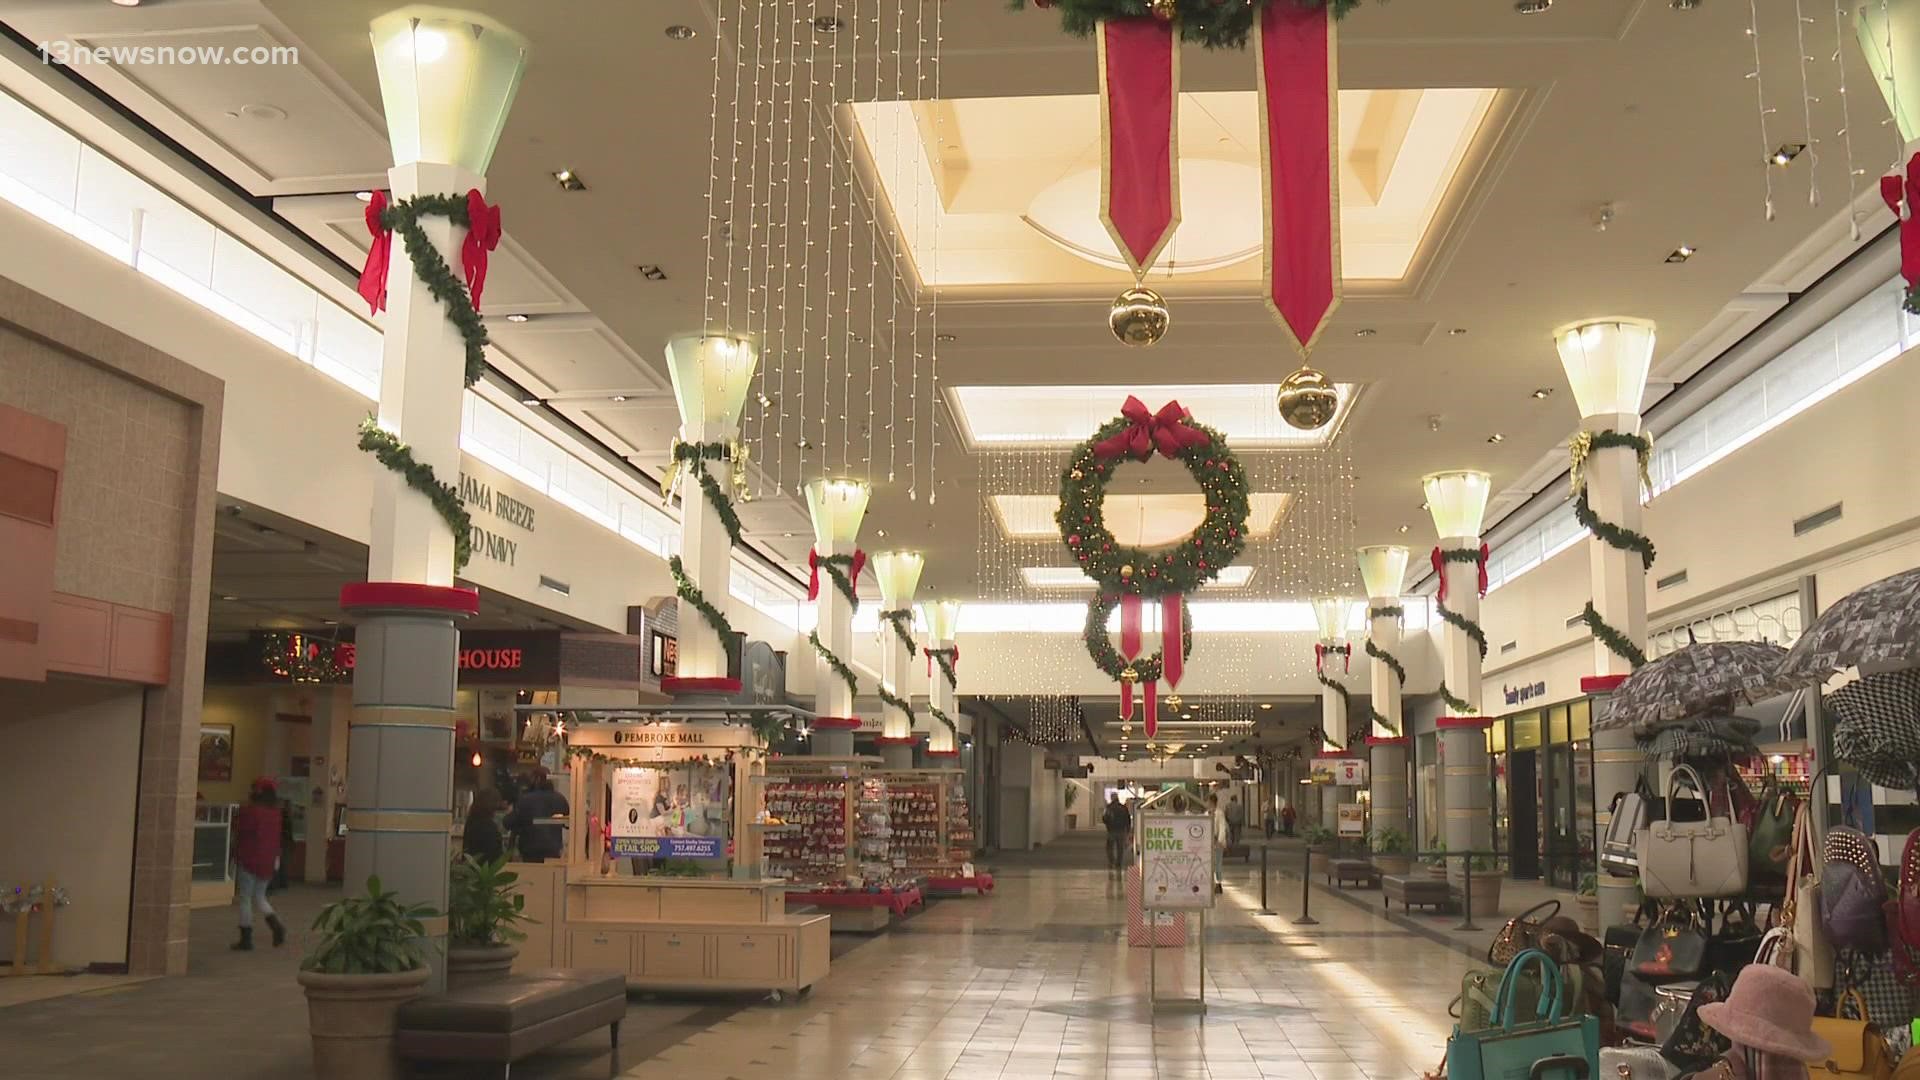 Some Pembroke Mall stores are being forced to close as the mall undergoes redevelopment.